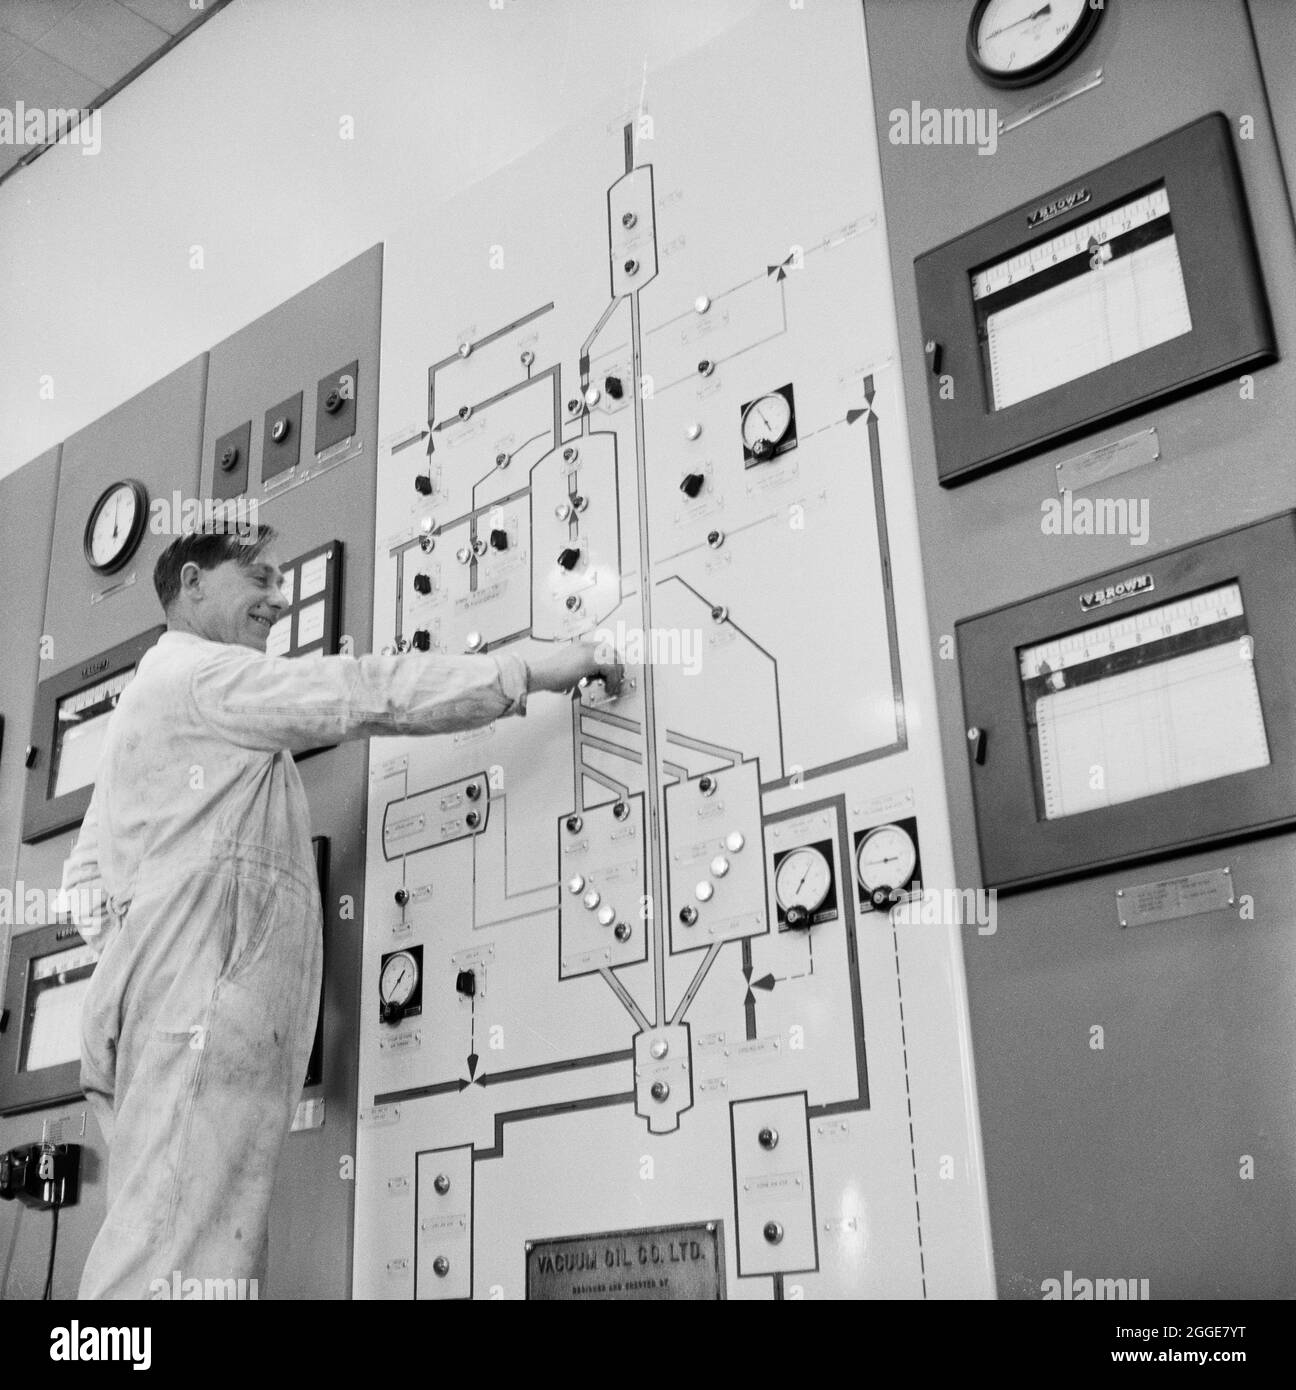 A worker operating the control board in the control room of the Air-Lift Thermofor Catalytic Cracking Unit at Coryton Oil Refinery. Coryton Oil Refinery was ceremonially opened in May 1954 by Her Majesty Queen Elizabeth, the Queen Mother. It was operated by Vacuum Oil Company; a unit of Mobil. From 1996, the refinery was run by BP as part of a joint venture with Mobil. Ownership of Coryton Refinery was later transferred to BP in 2000, and then Petroplus Holdings in 2007. Major products of the refinery included petrol and diesel, aviation fuels, liquefied petroleum gas, fuel oils and bitumen. C Stock Photo